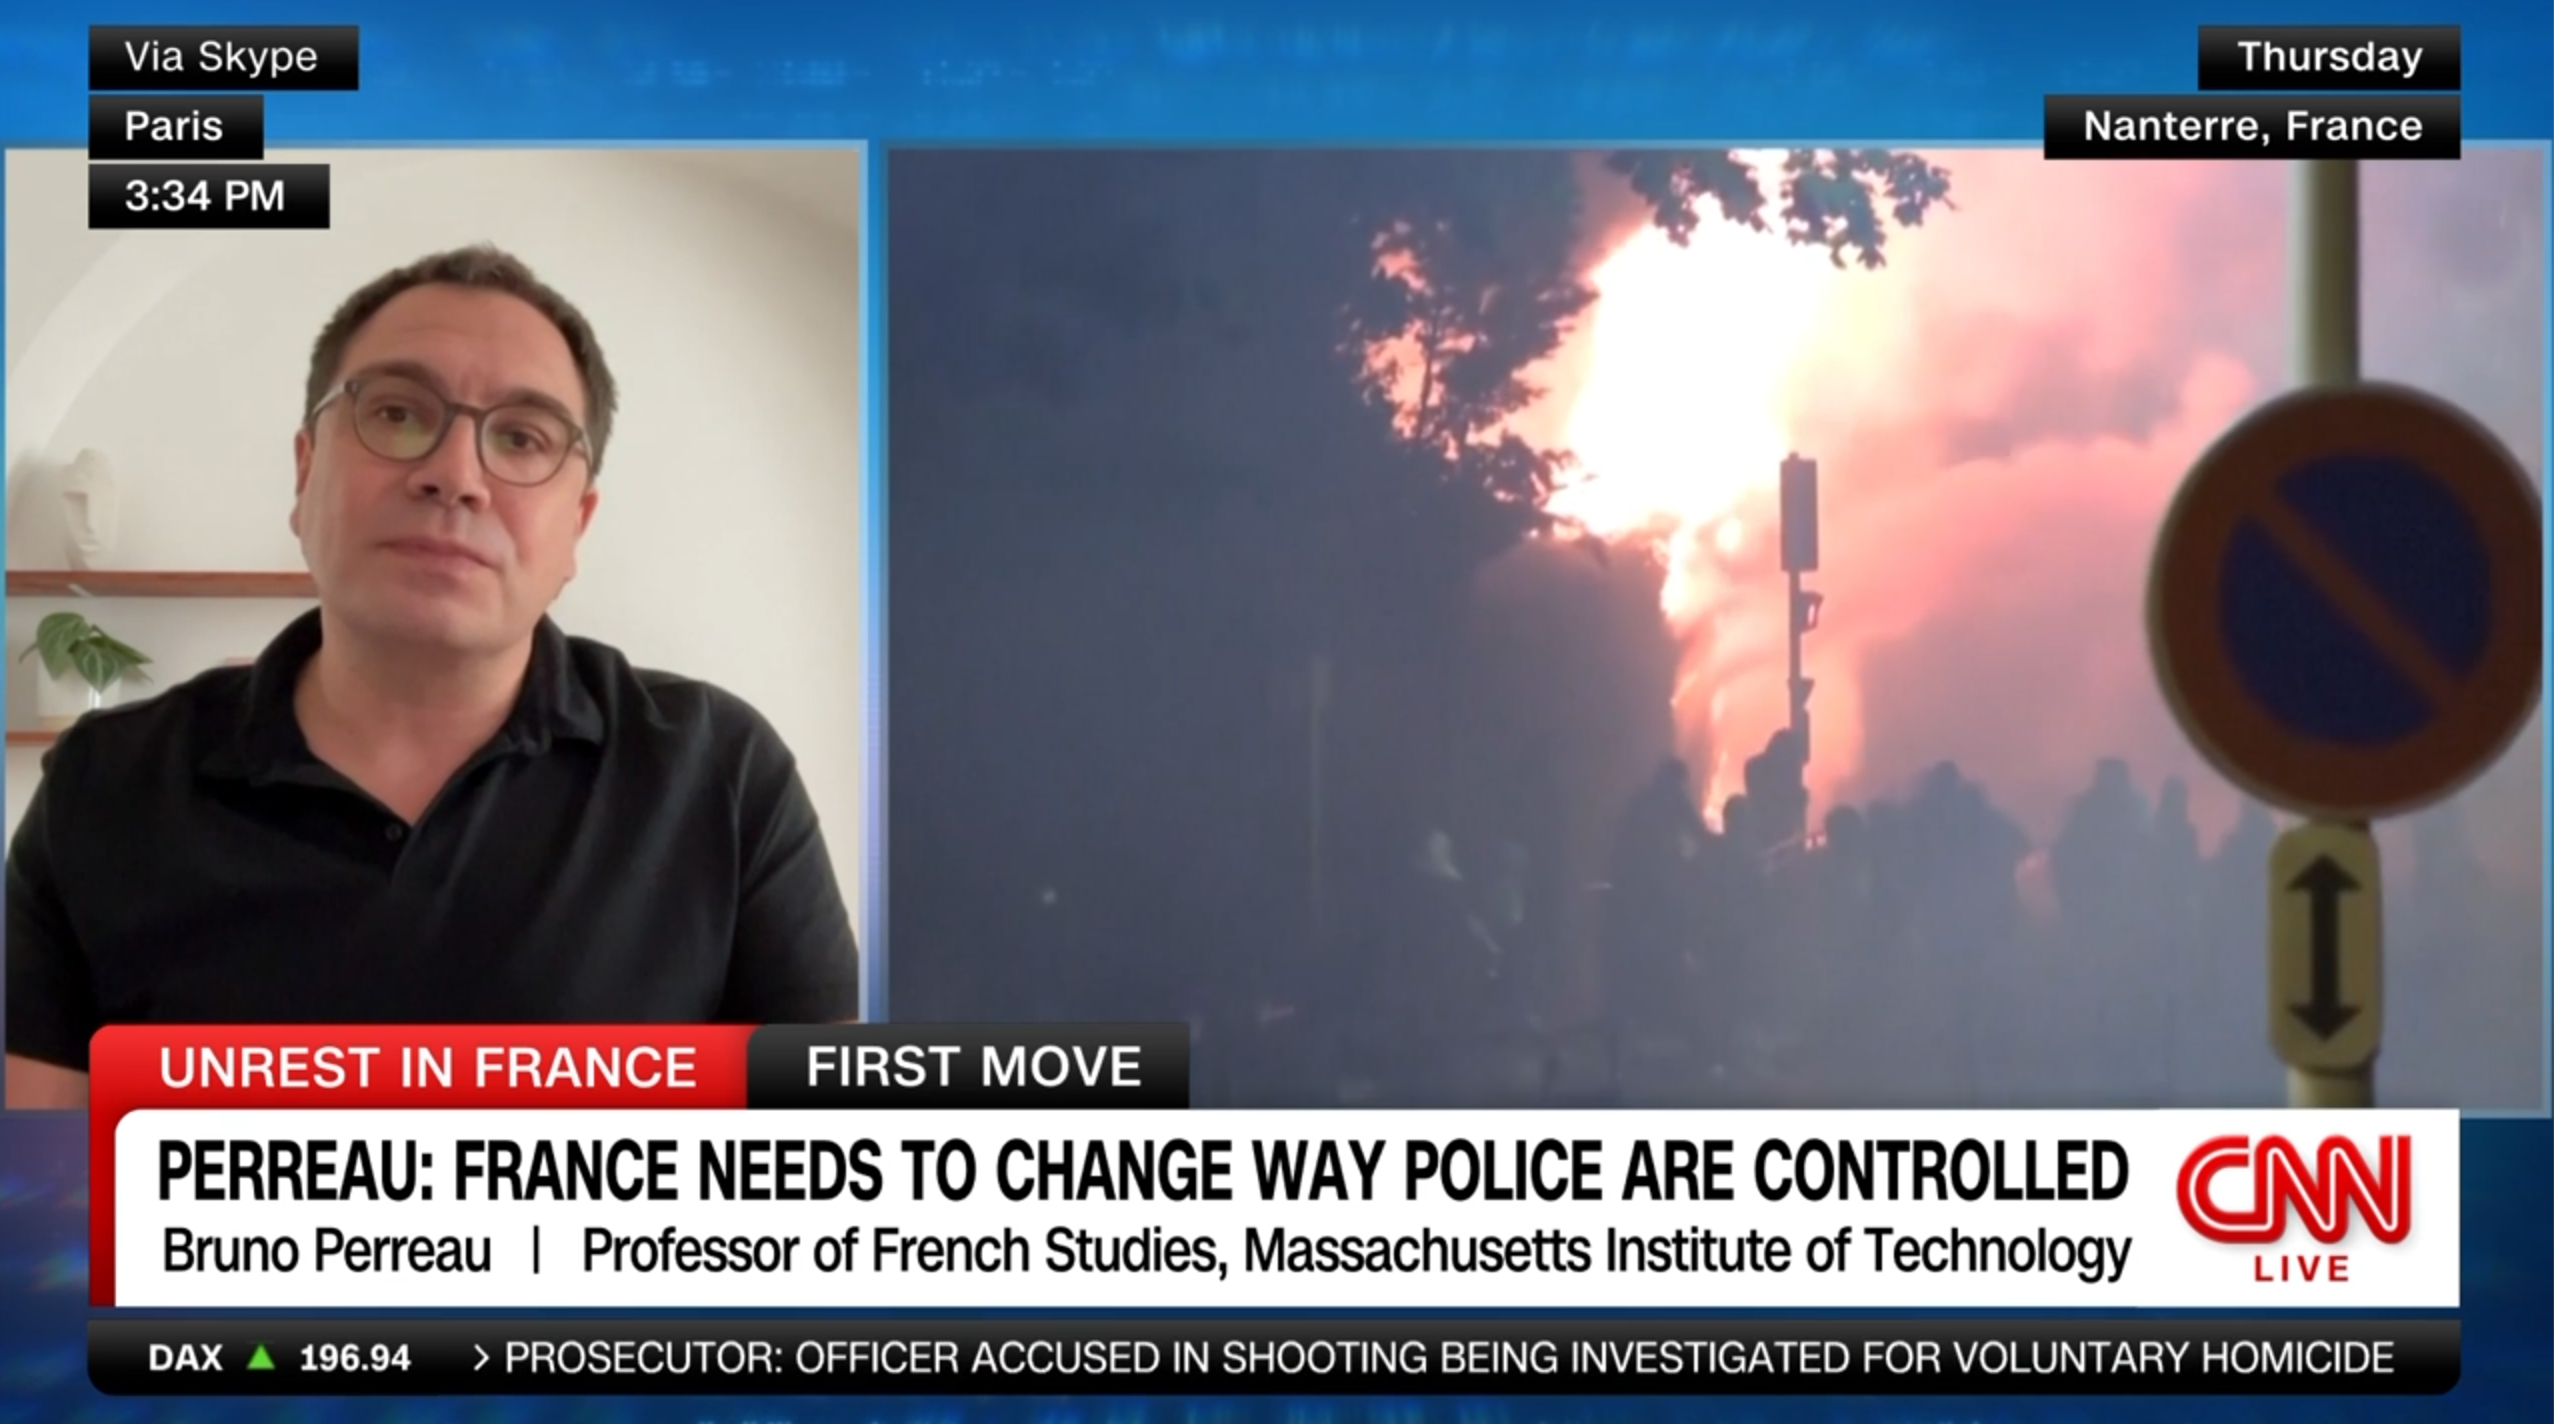 CNN Live: Prof Bruno Perreau on the unrest in France